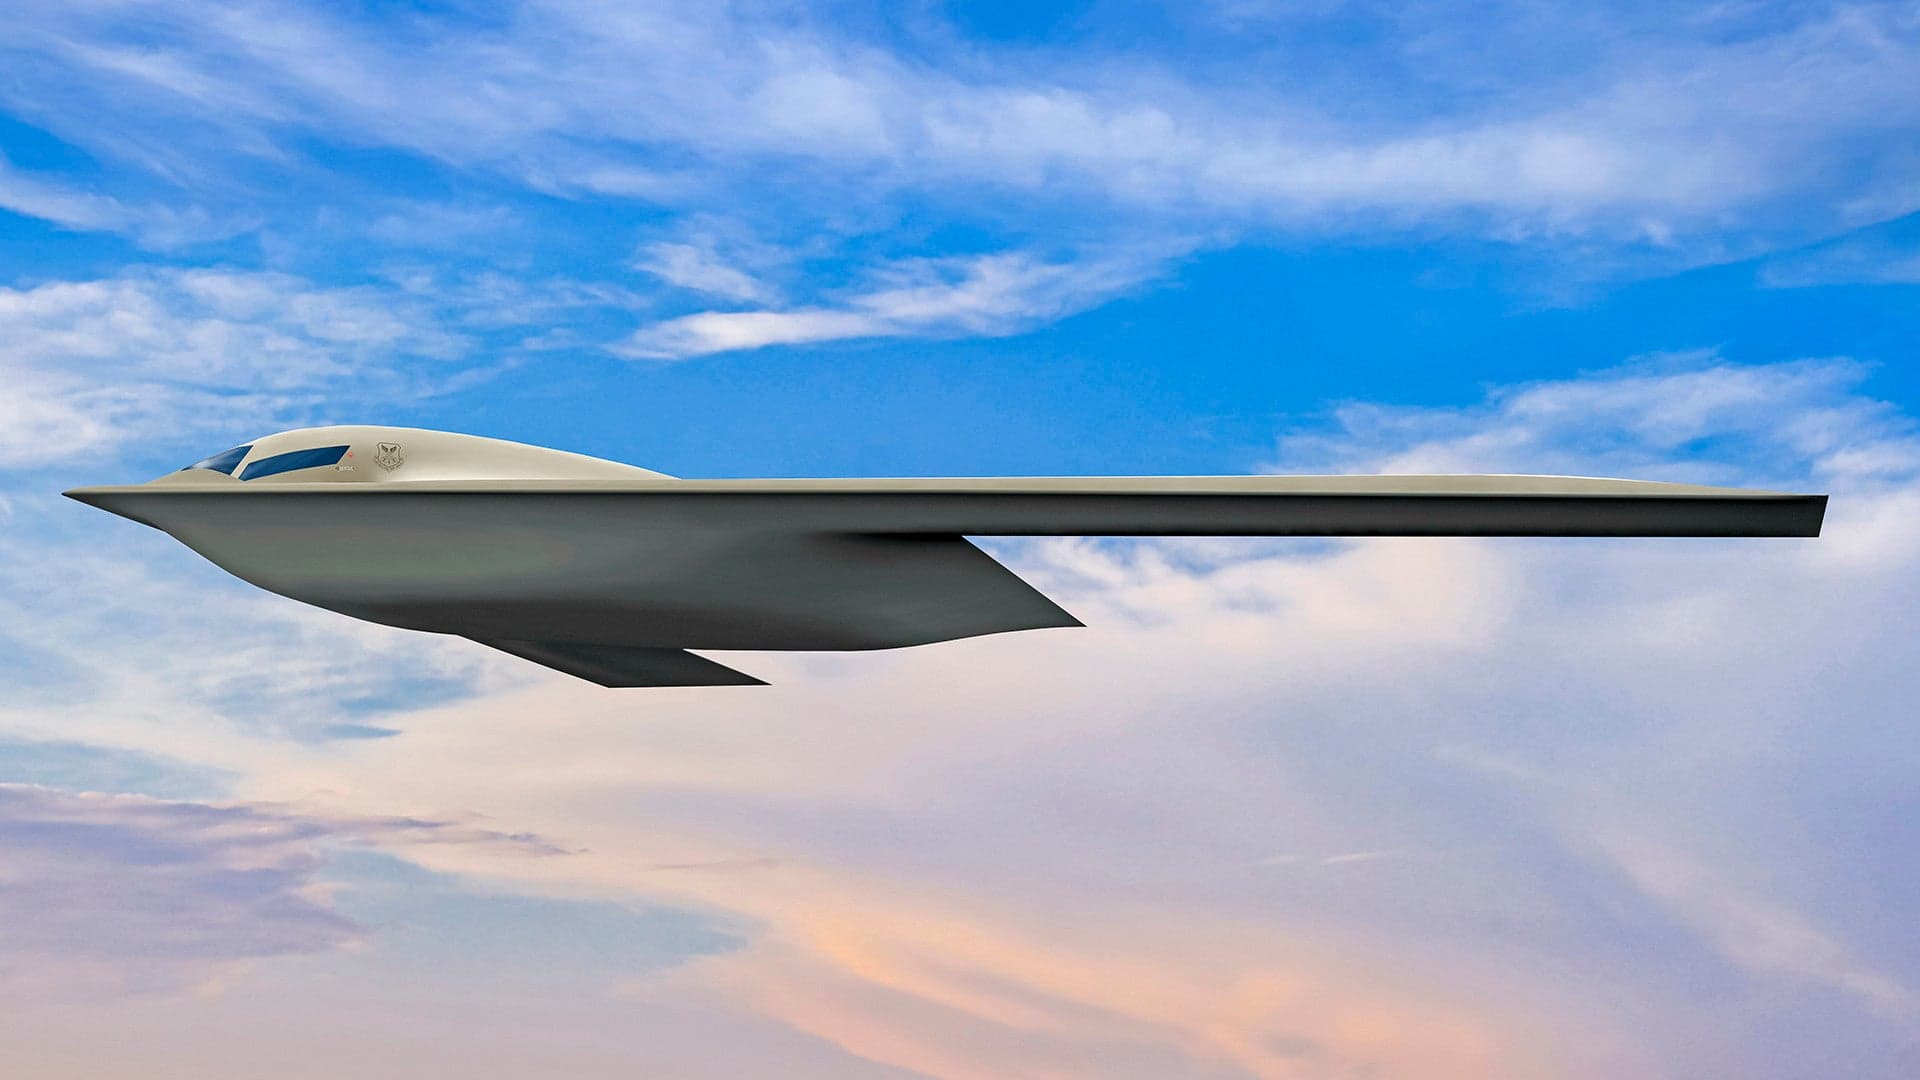 New B-21 Raider Stealth Bomber Rendering Released By The Air Force (Updated)